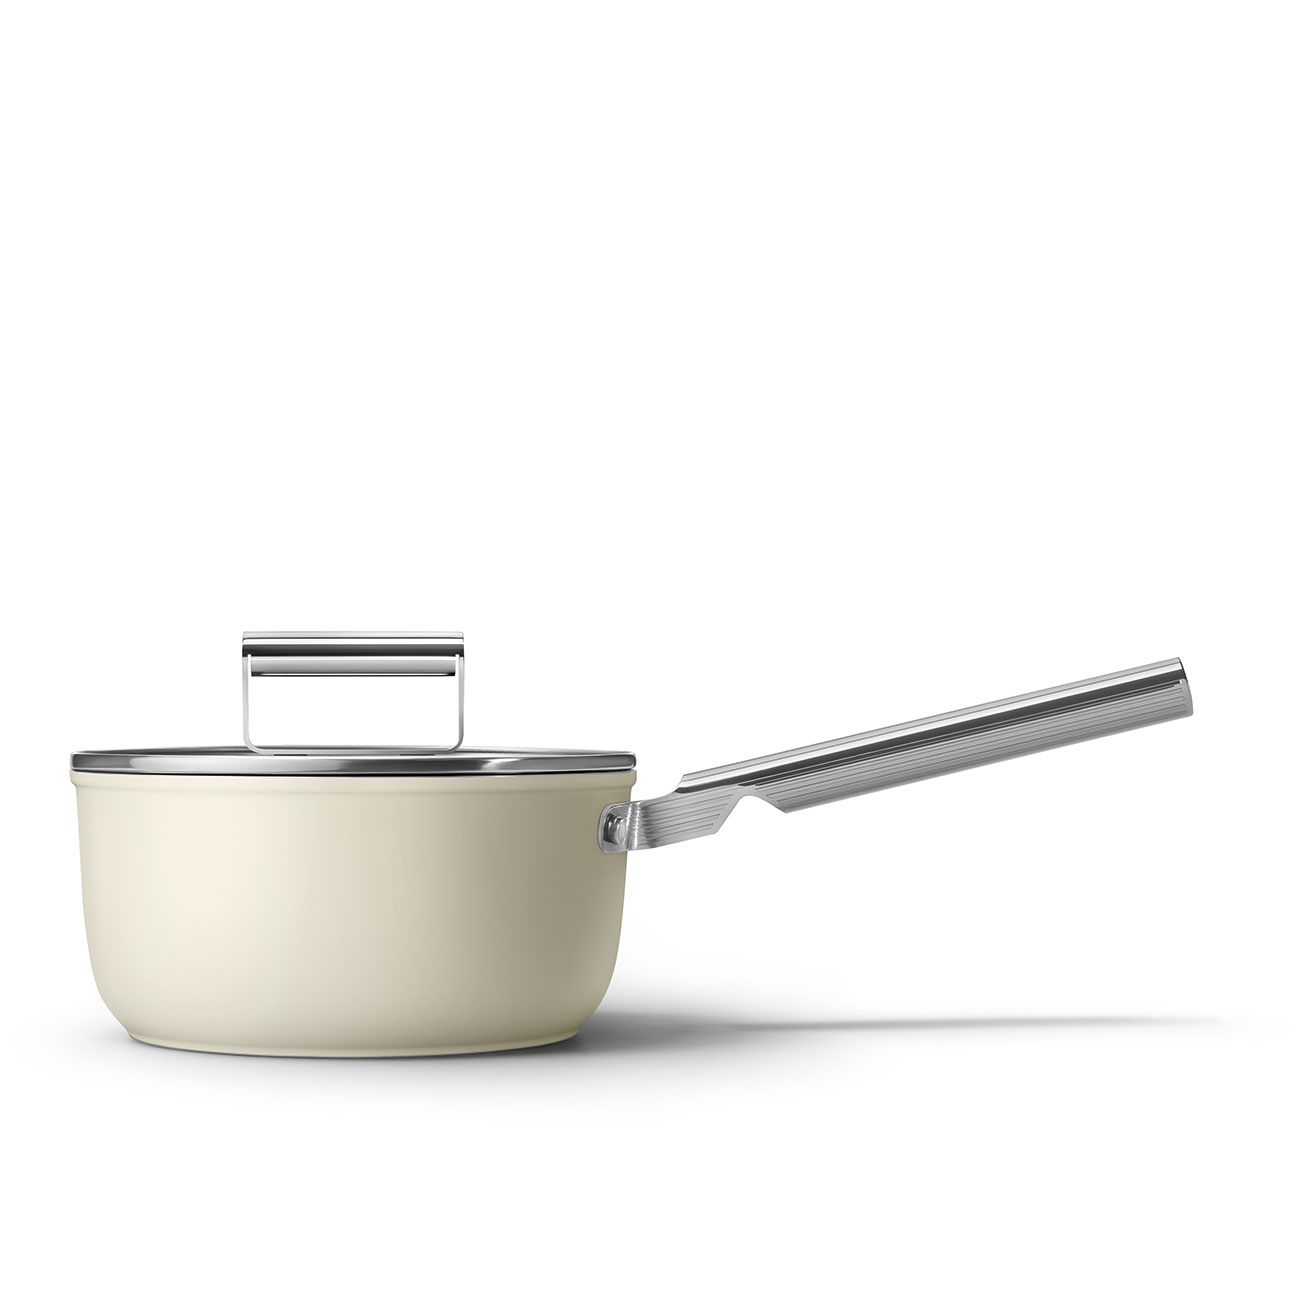 Smeg Cream Non-stick Saucepan with glass lid and stainless steel handle_1